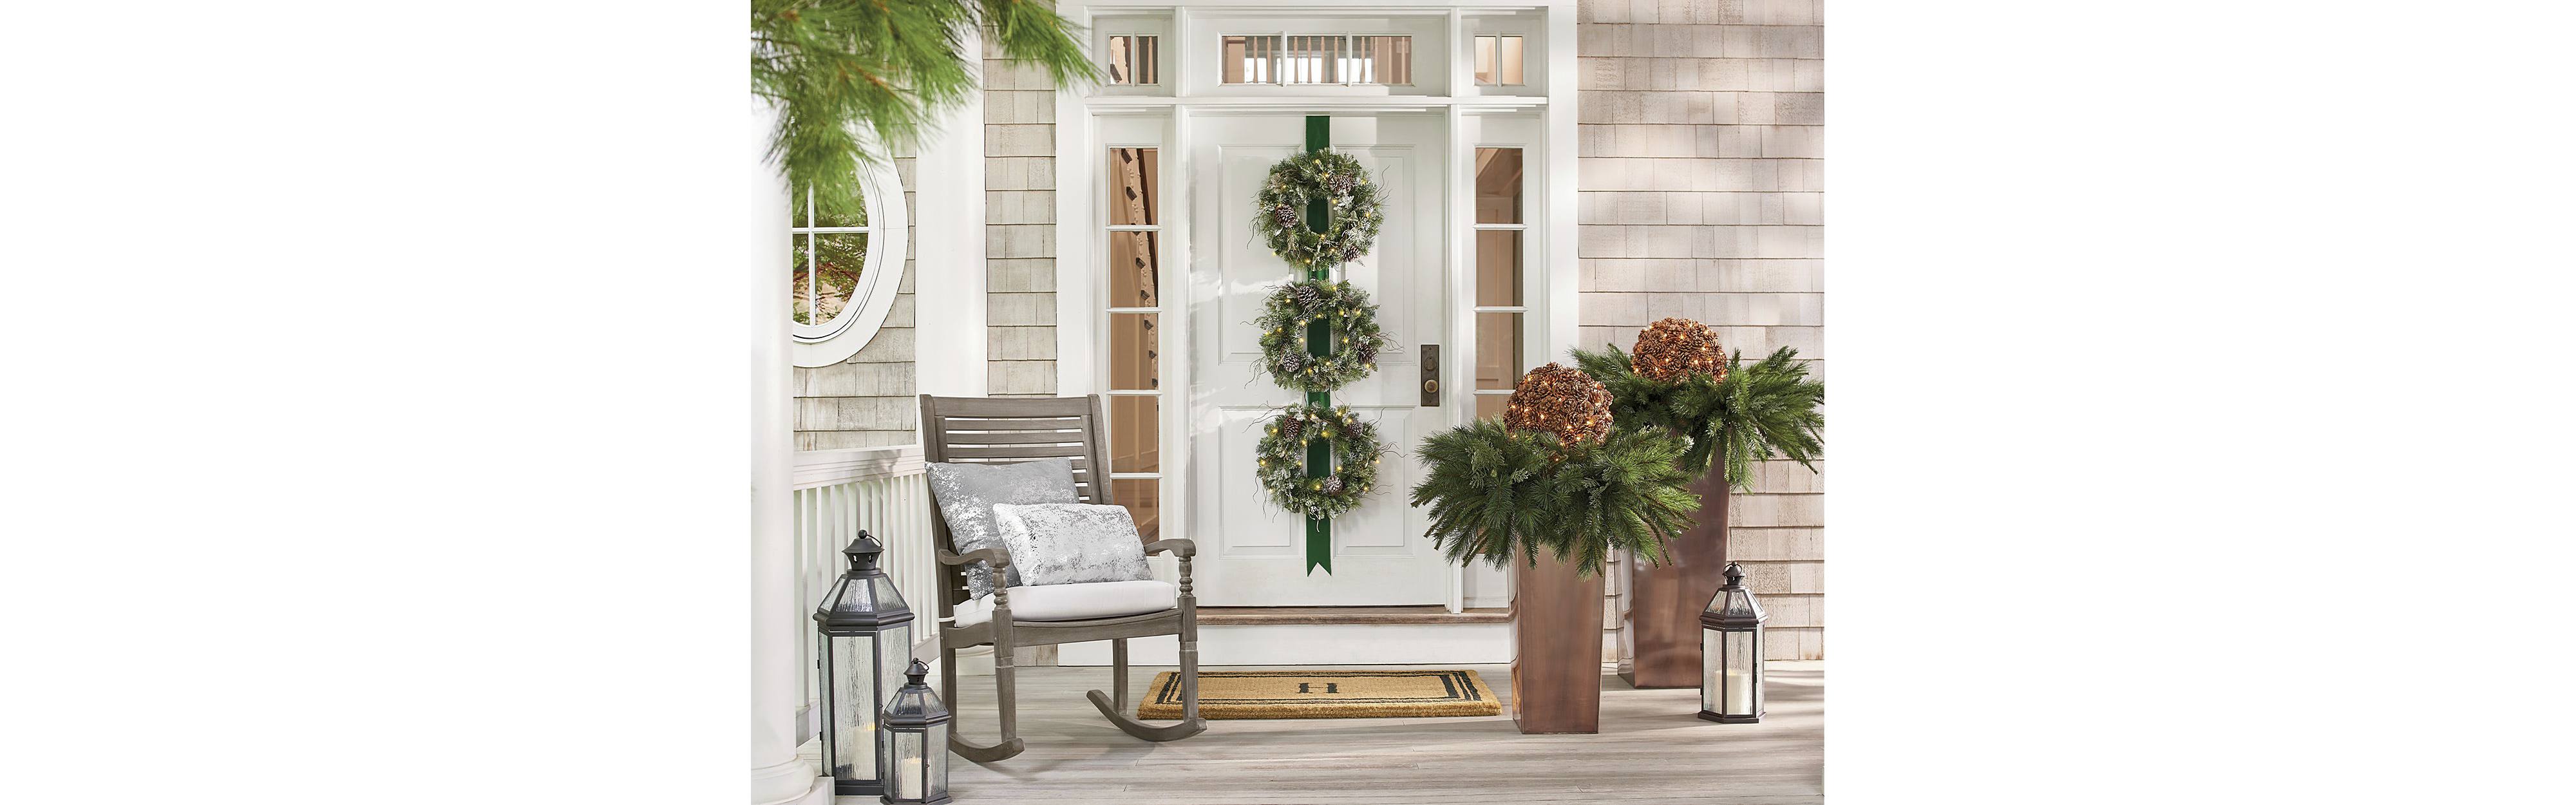 Christmas Porch Decorations 15 Holly Jolly Looks Grandin Road Blog